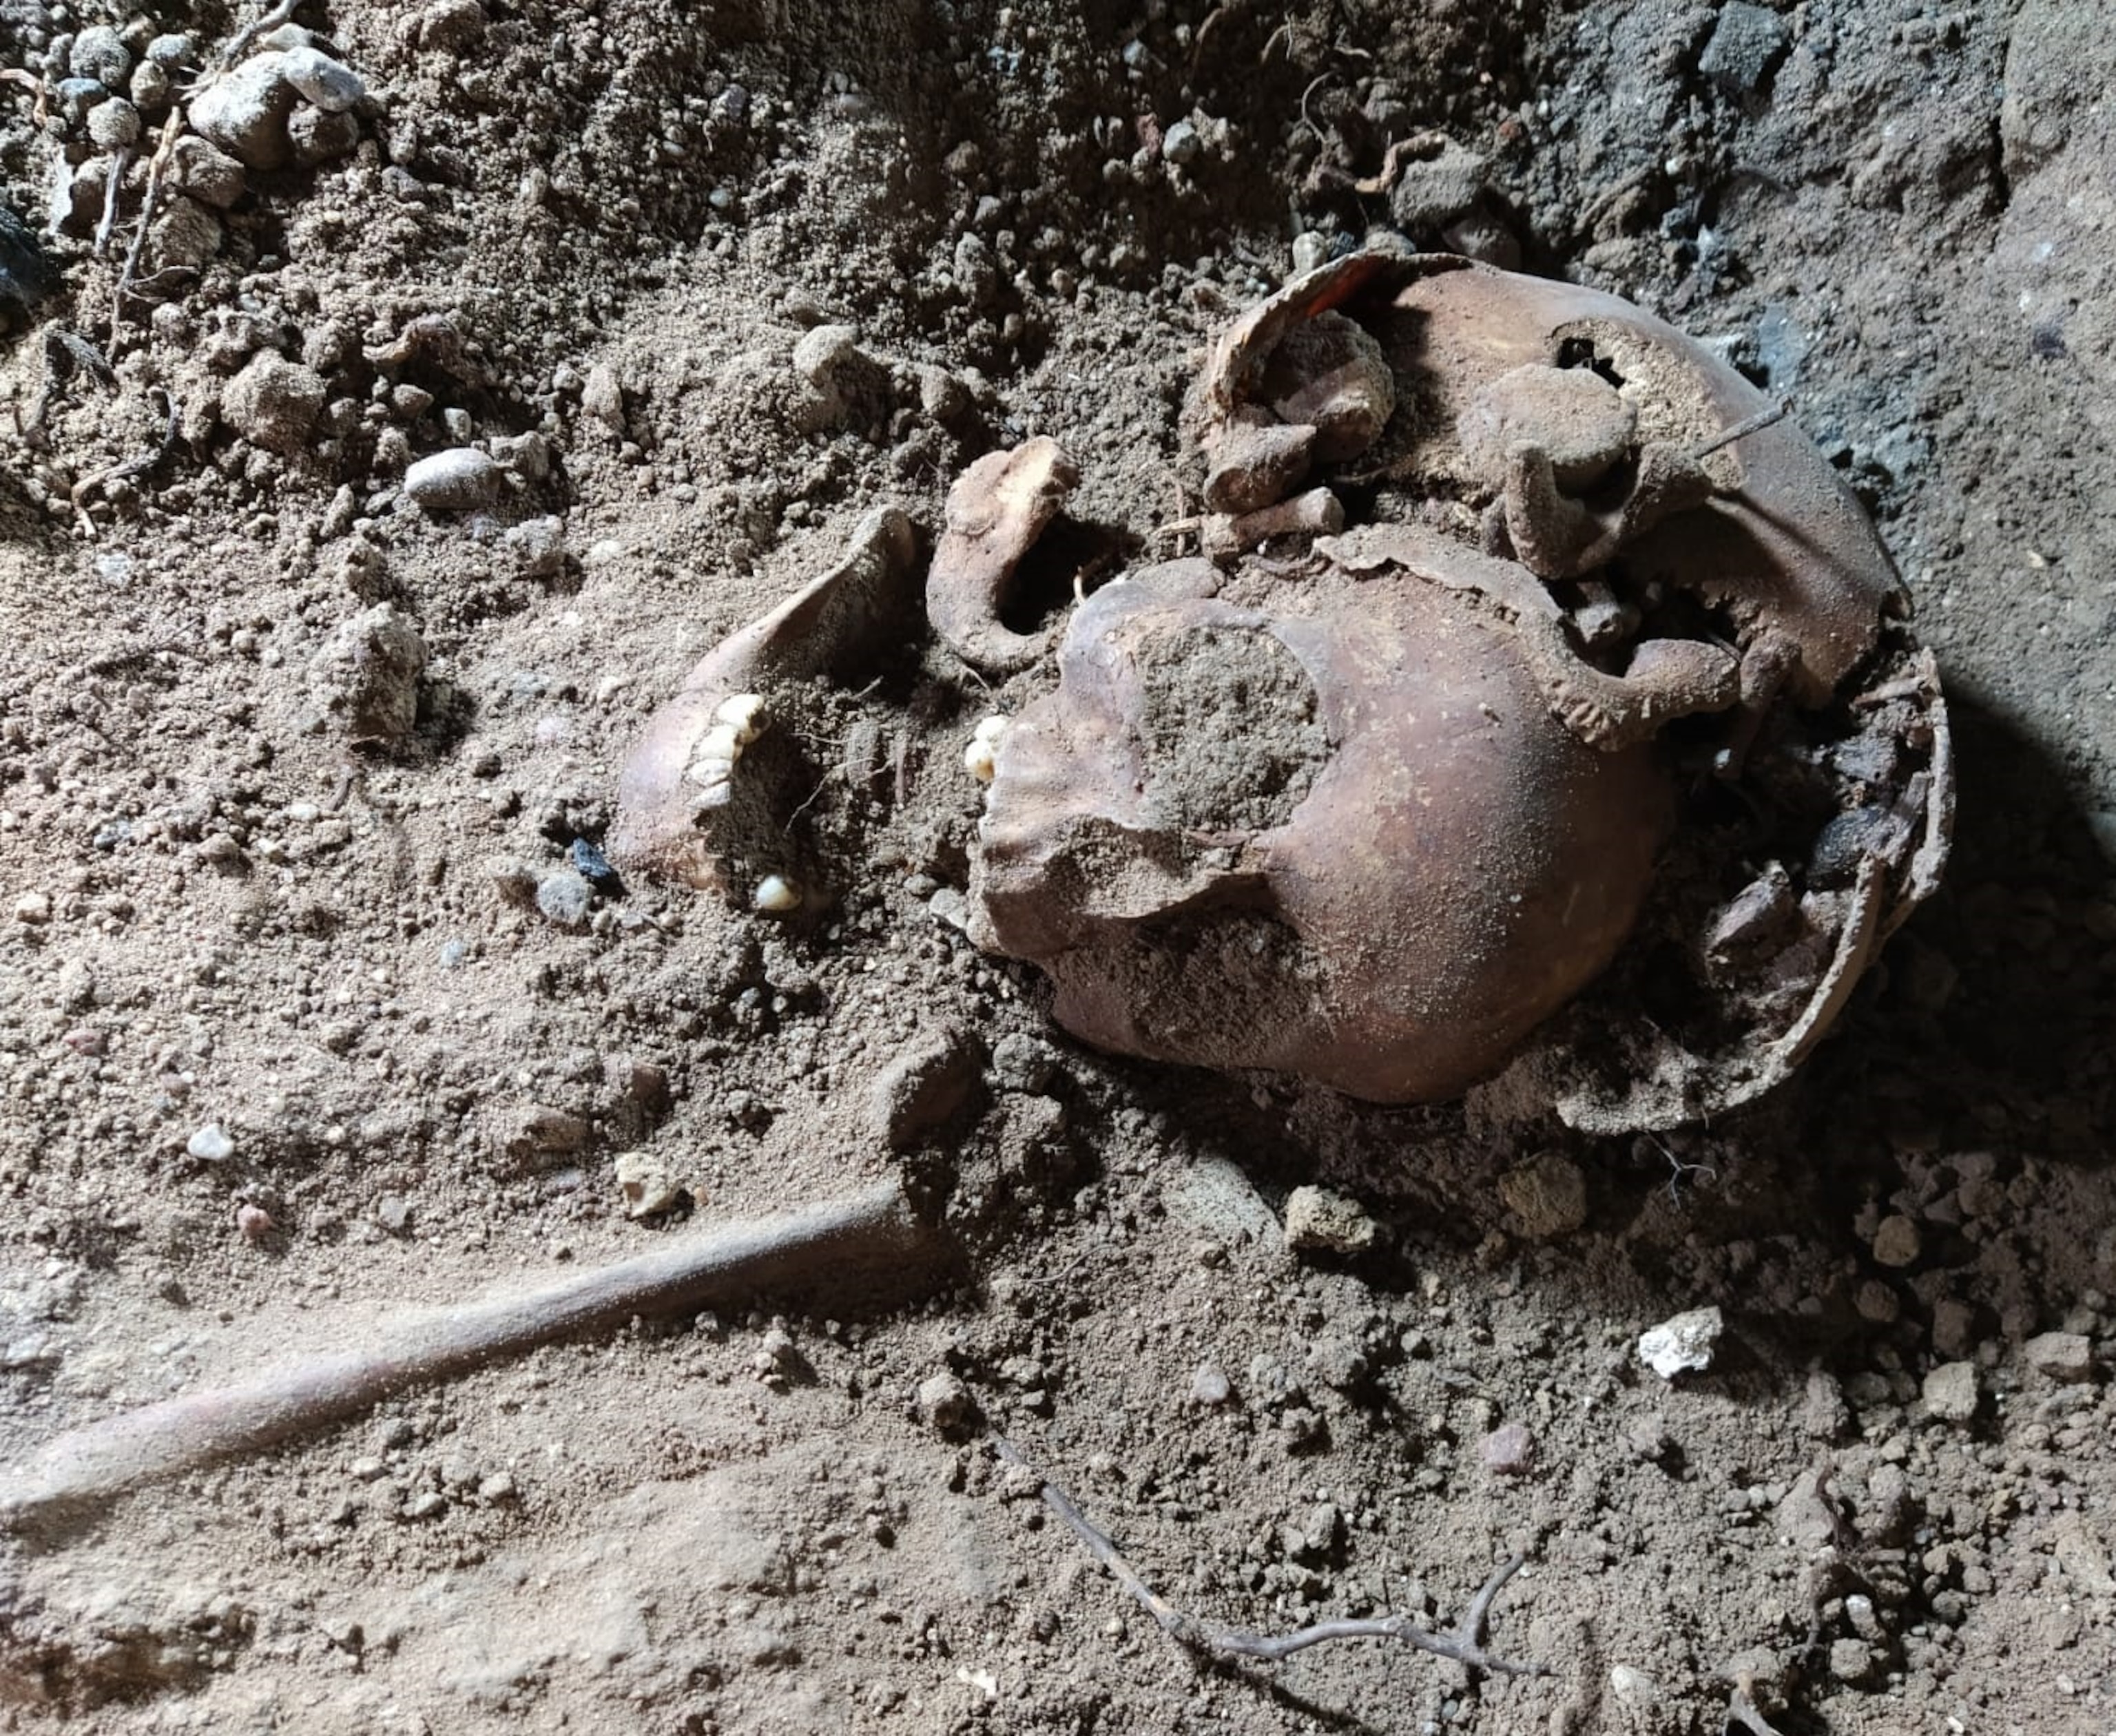 A skull is visible can be seen amongst the dirt.